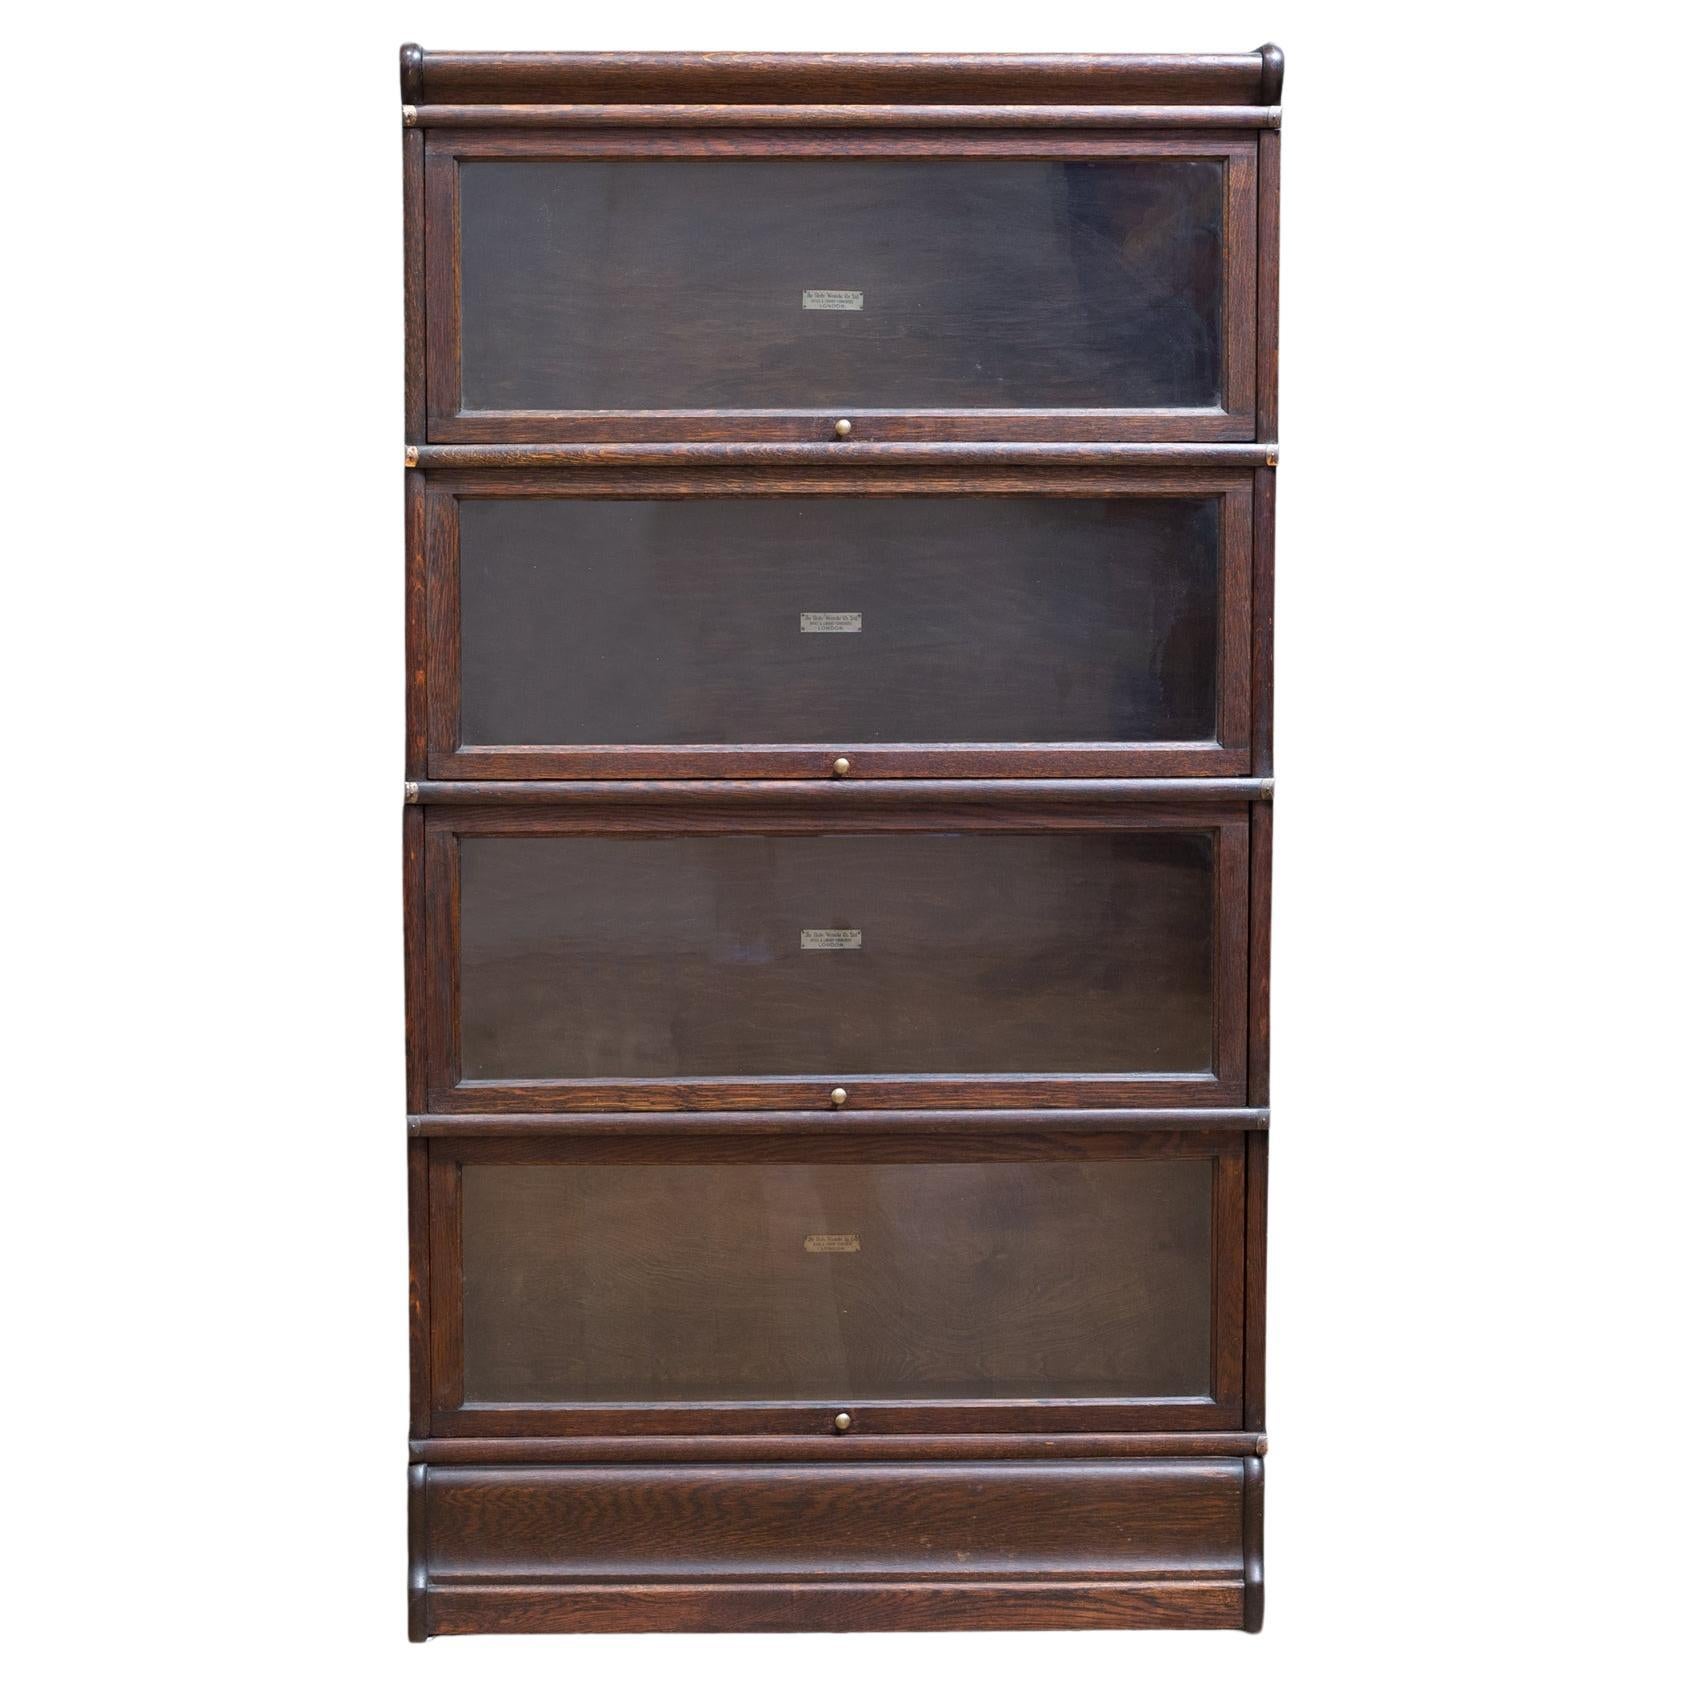 Antique Globe-Wernicke London 4 Stack Lawyer's Bookcase, c.1890-1910